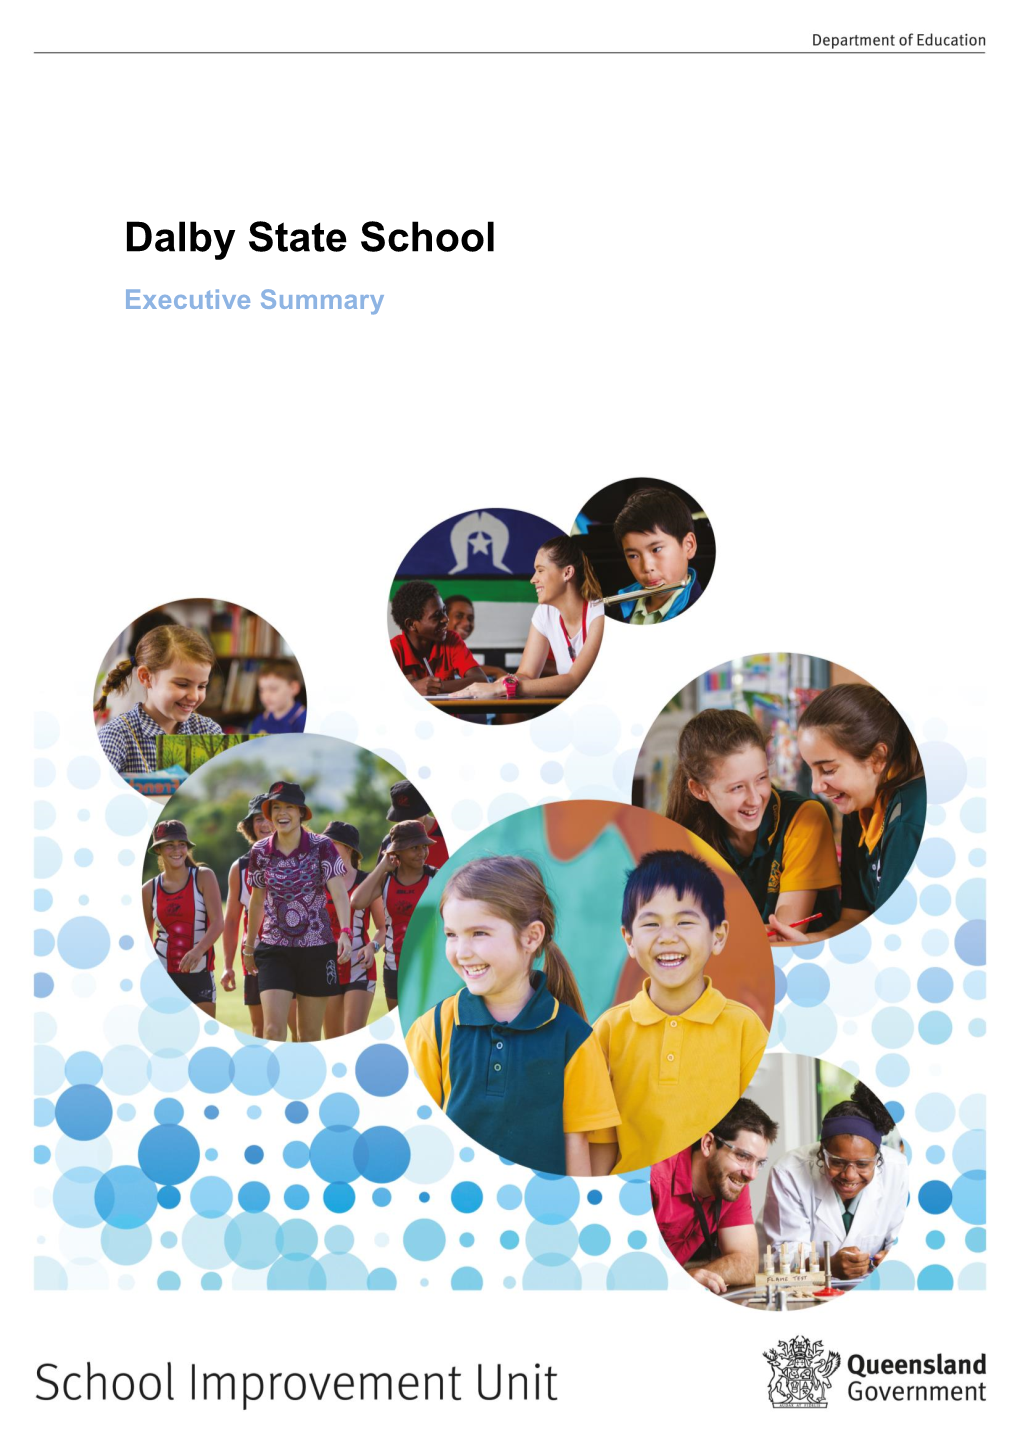 School Improvement Unit (SIU) at Dalby State School from 30 April to 2 May 2019